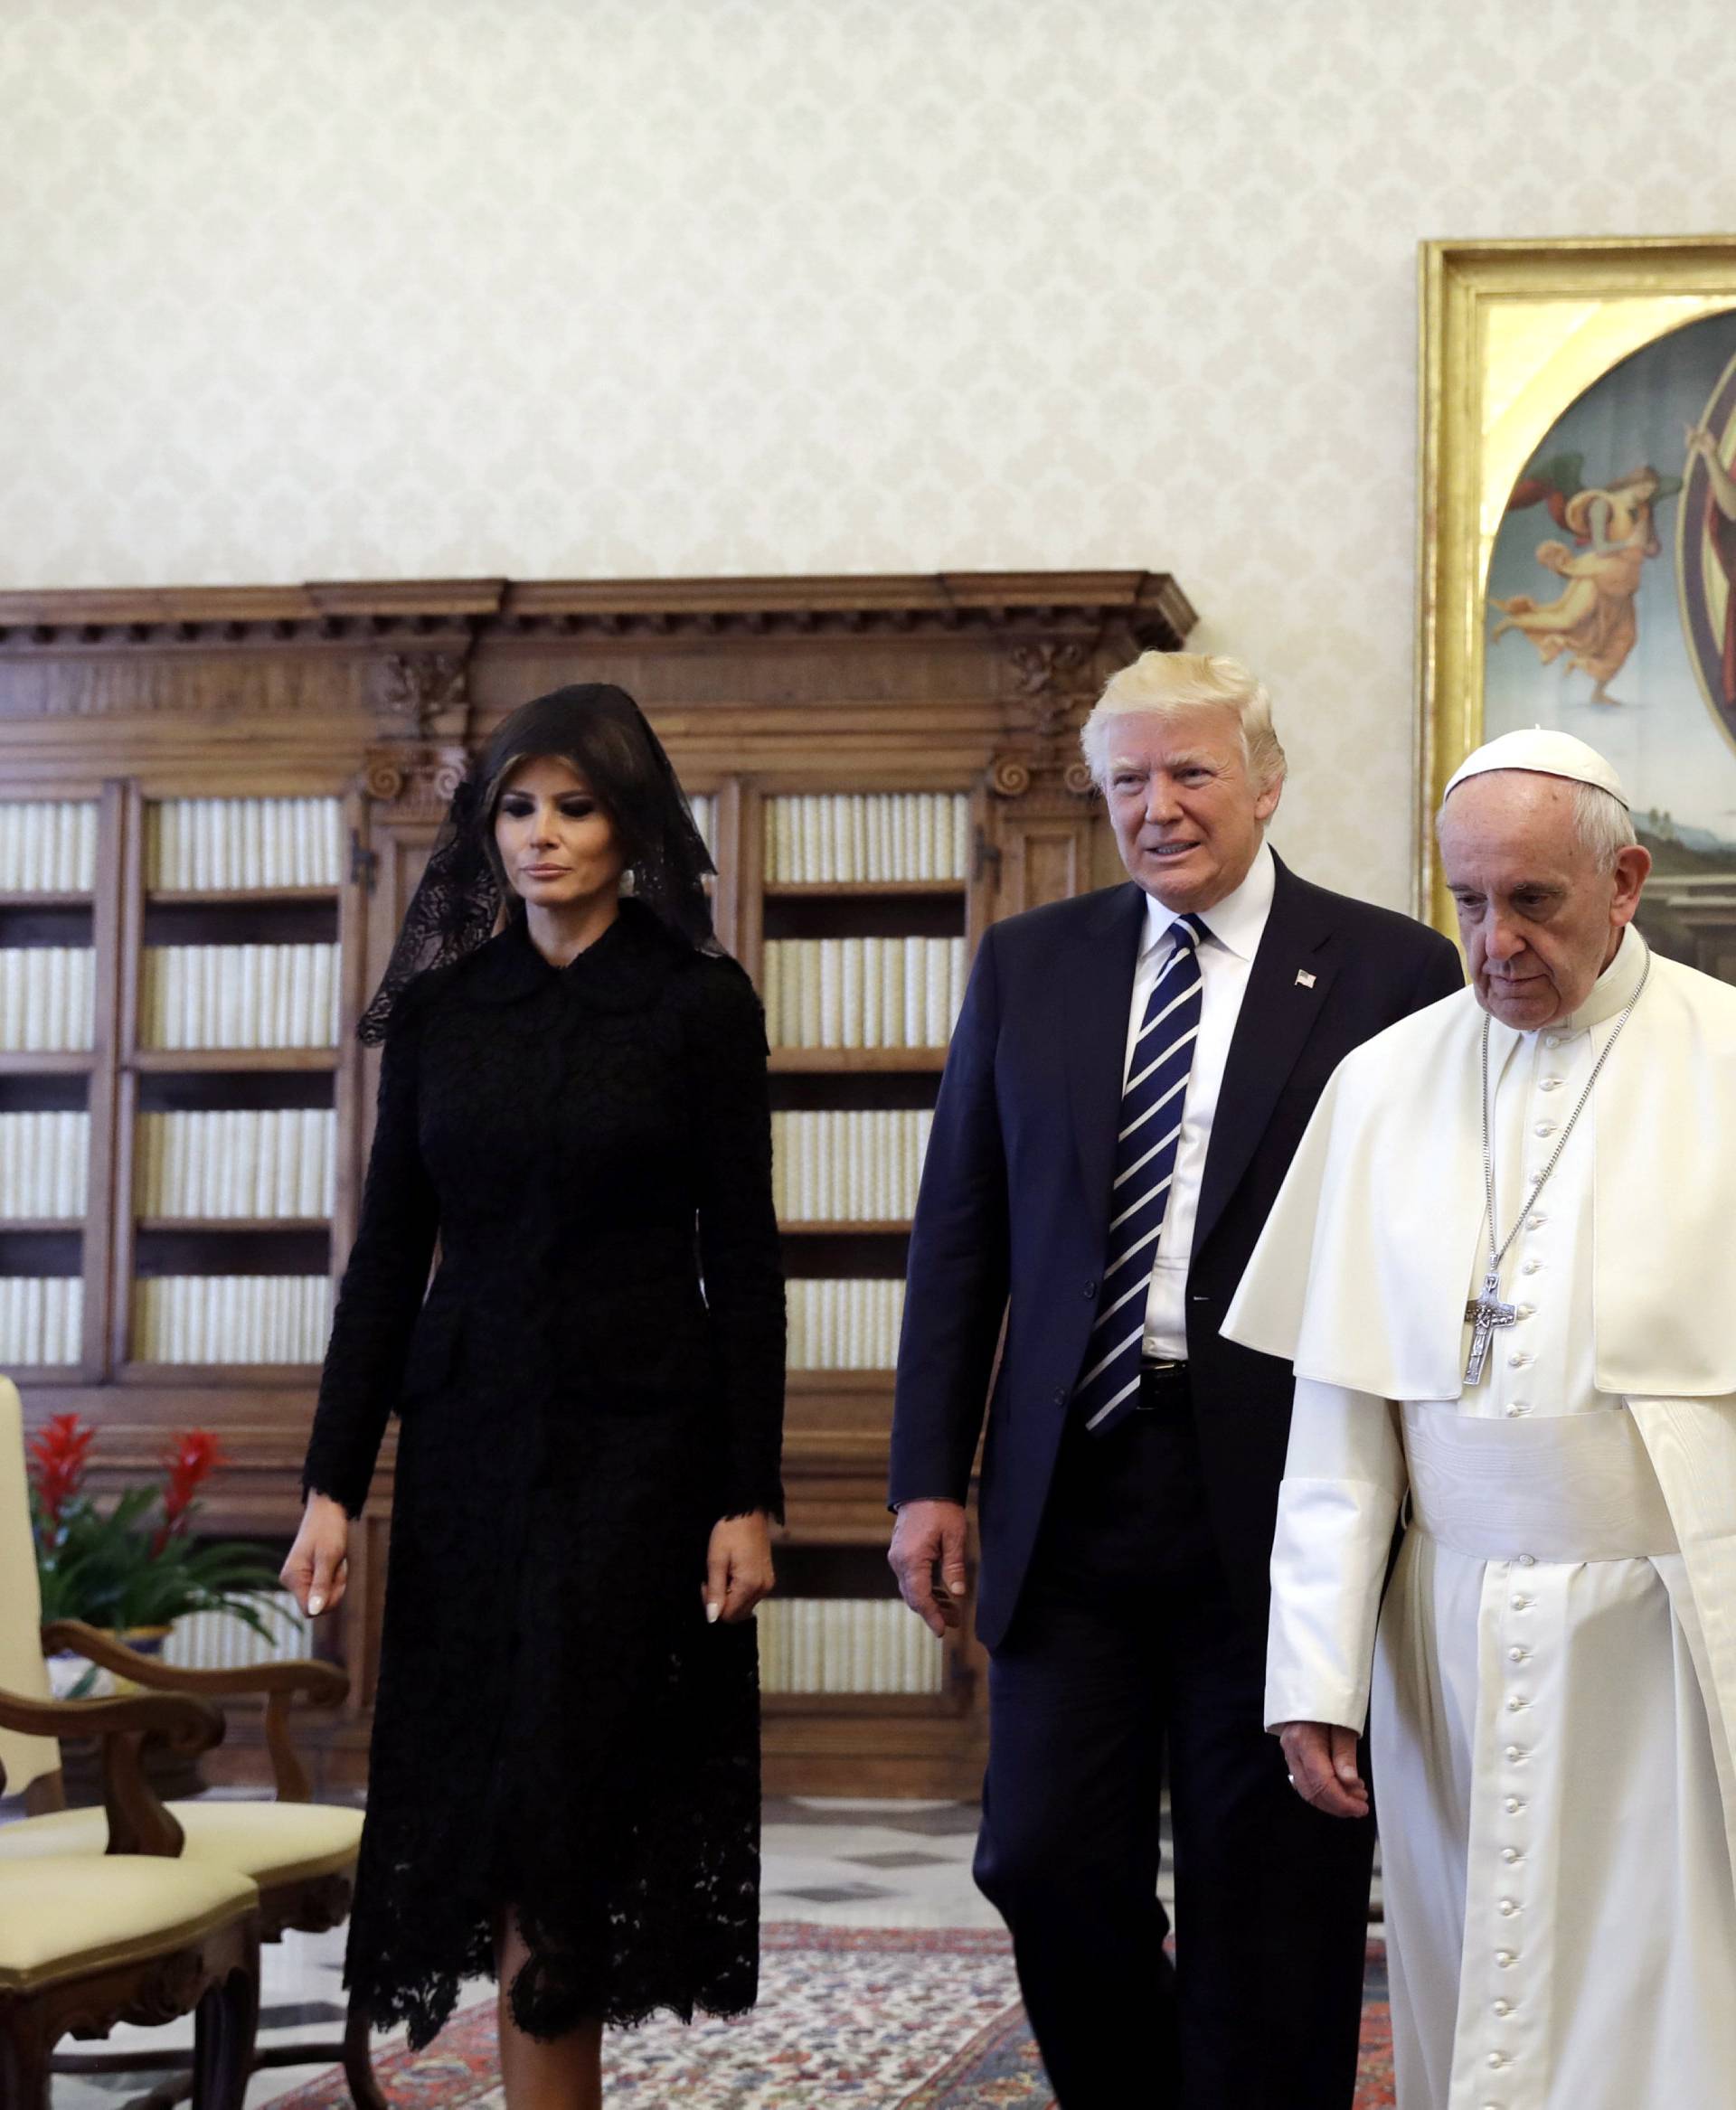 U.S. President Donald Trump and first lady Melania meet Pope Francis during a private audience at the Vatican